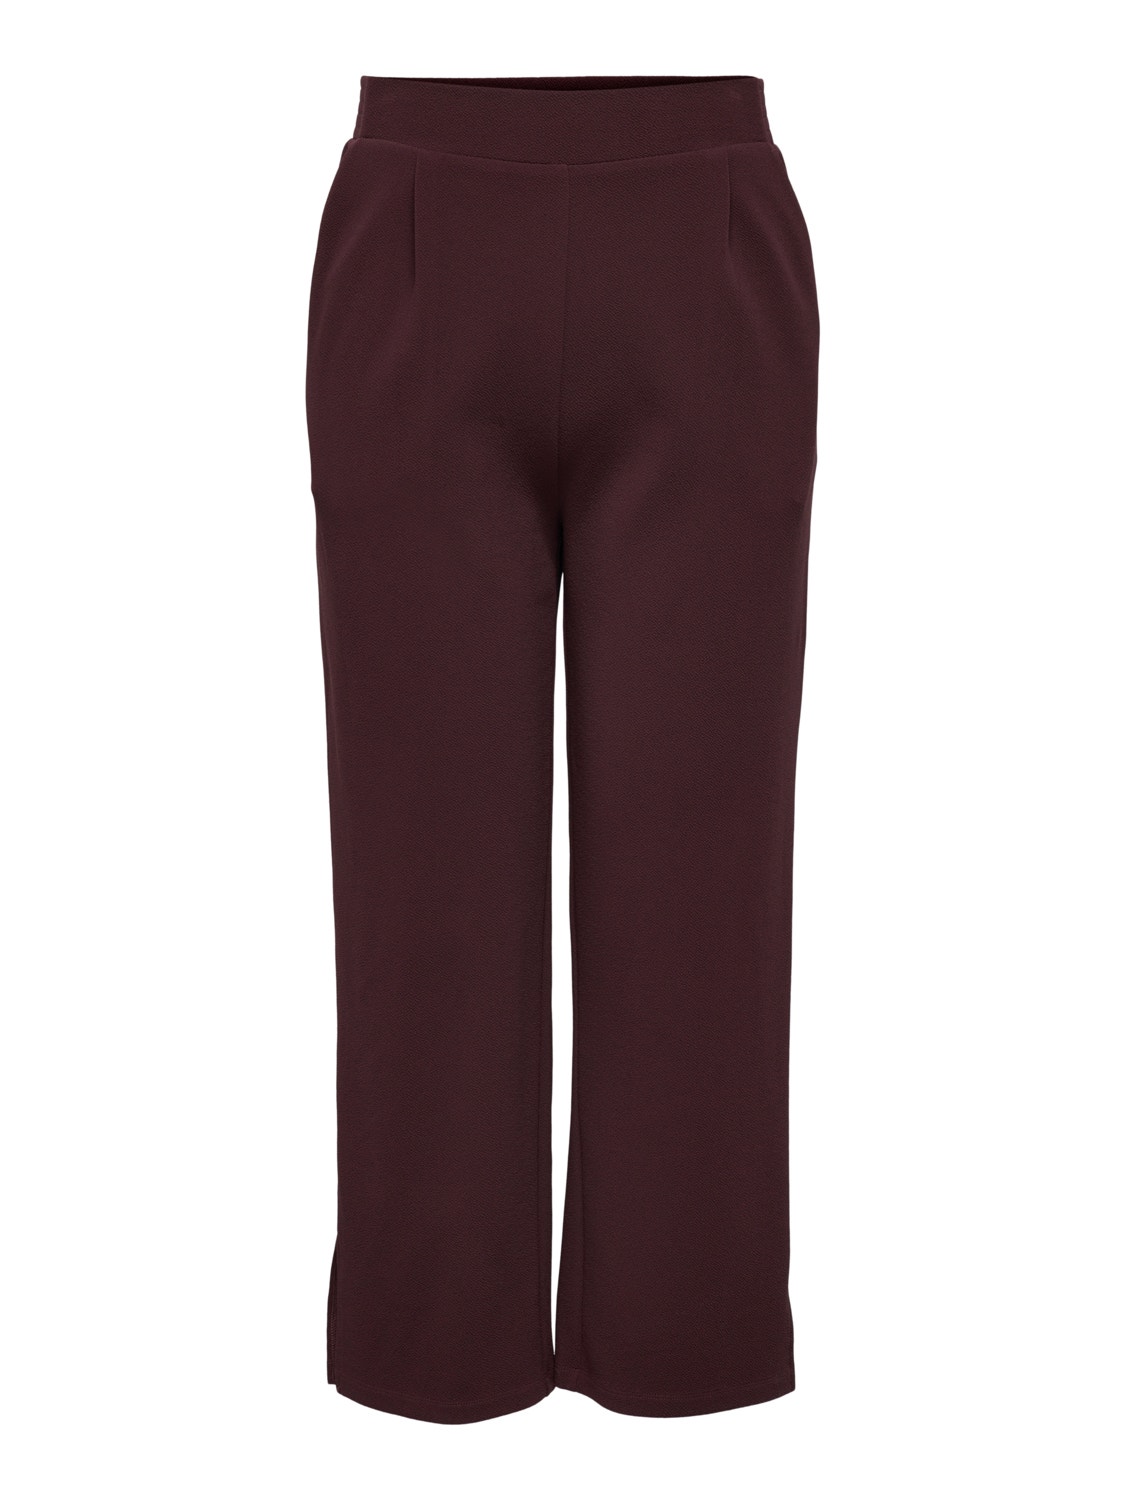 ONLY Curvy ankle Trousers -Vineyard Wine - 15247324